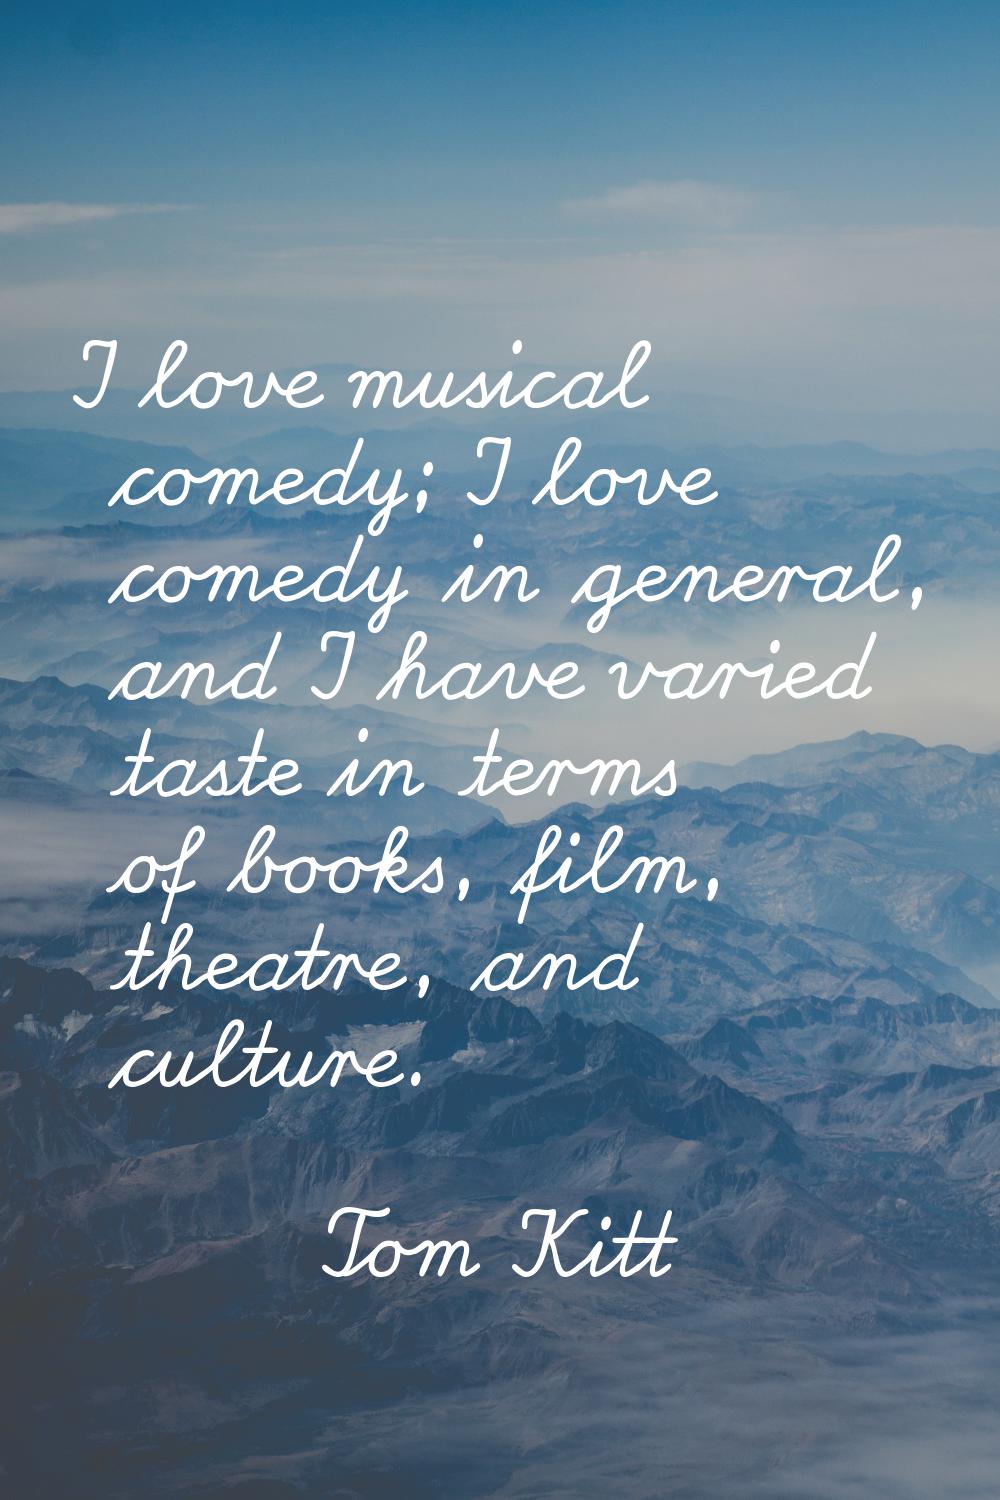 I love musical comedy; I love comedy in general, and I have varied taste in terms of books, film, t